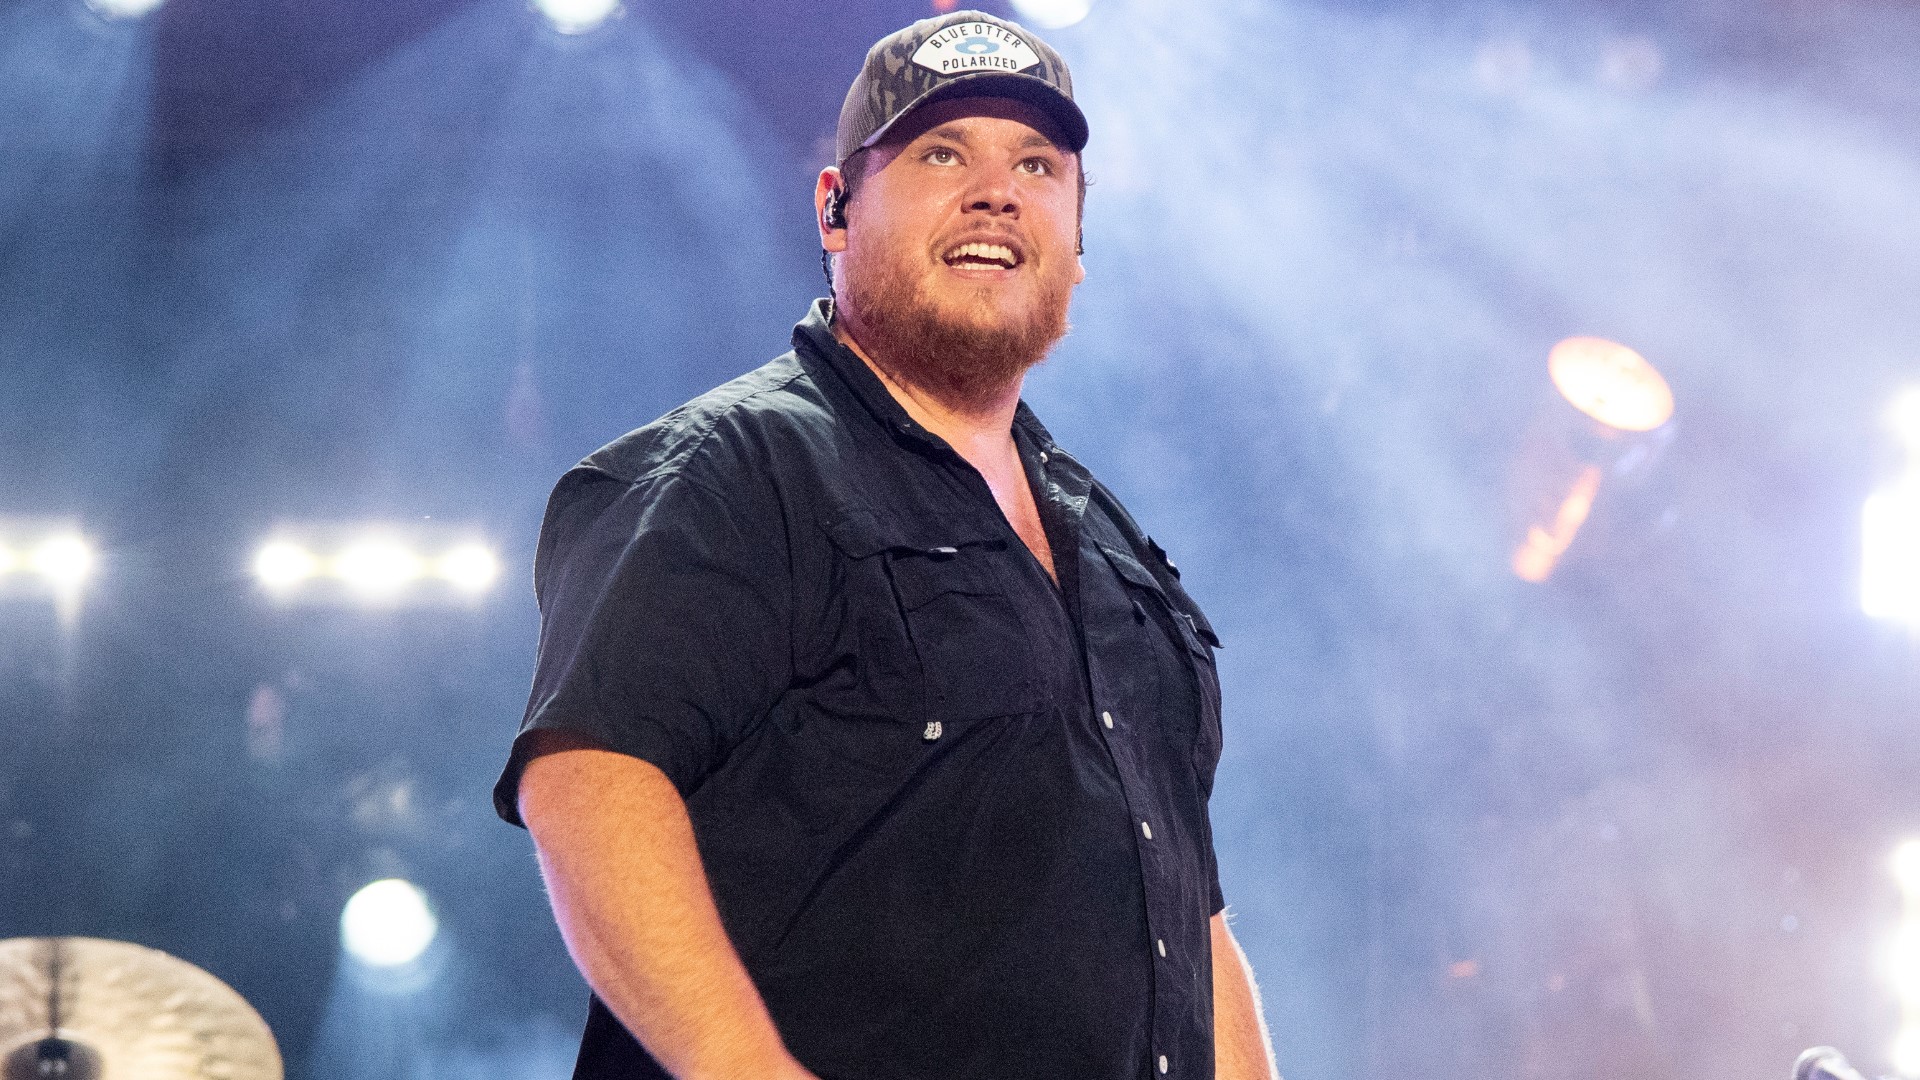 Luke Combs helping Tampa fan who sold unauthorized merch of him | wnep.com